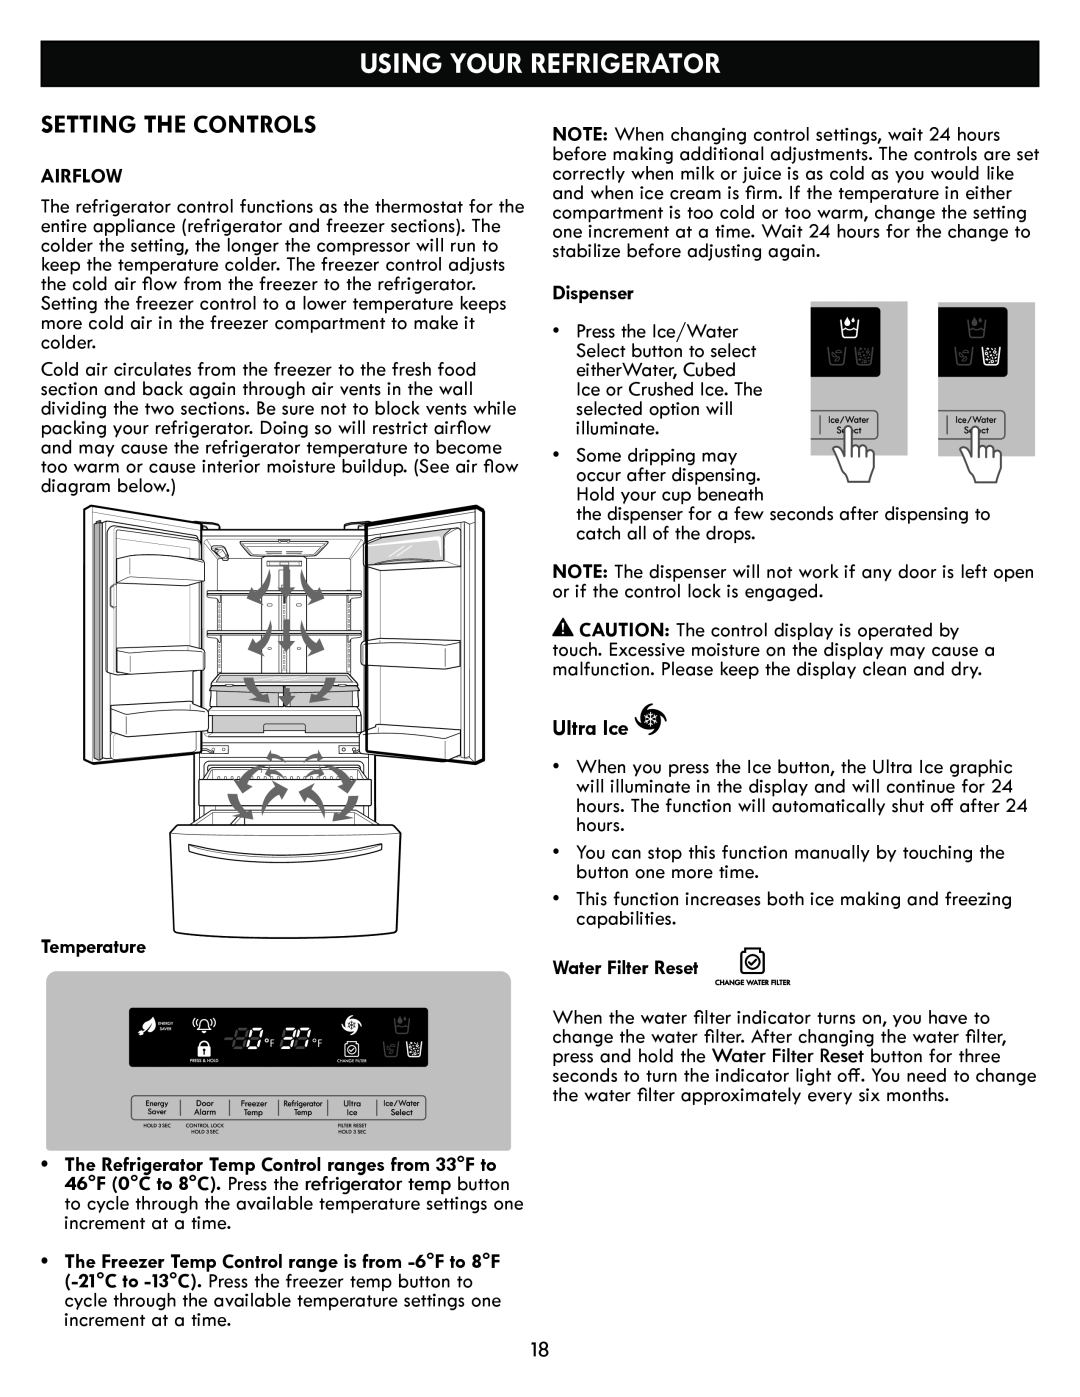 Kenmore kenmore manual Using Your Refrigerator, Setting The Controls, Ultra Ice, Airflow, Temperature, Dispenser 